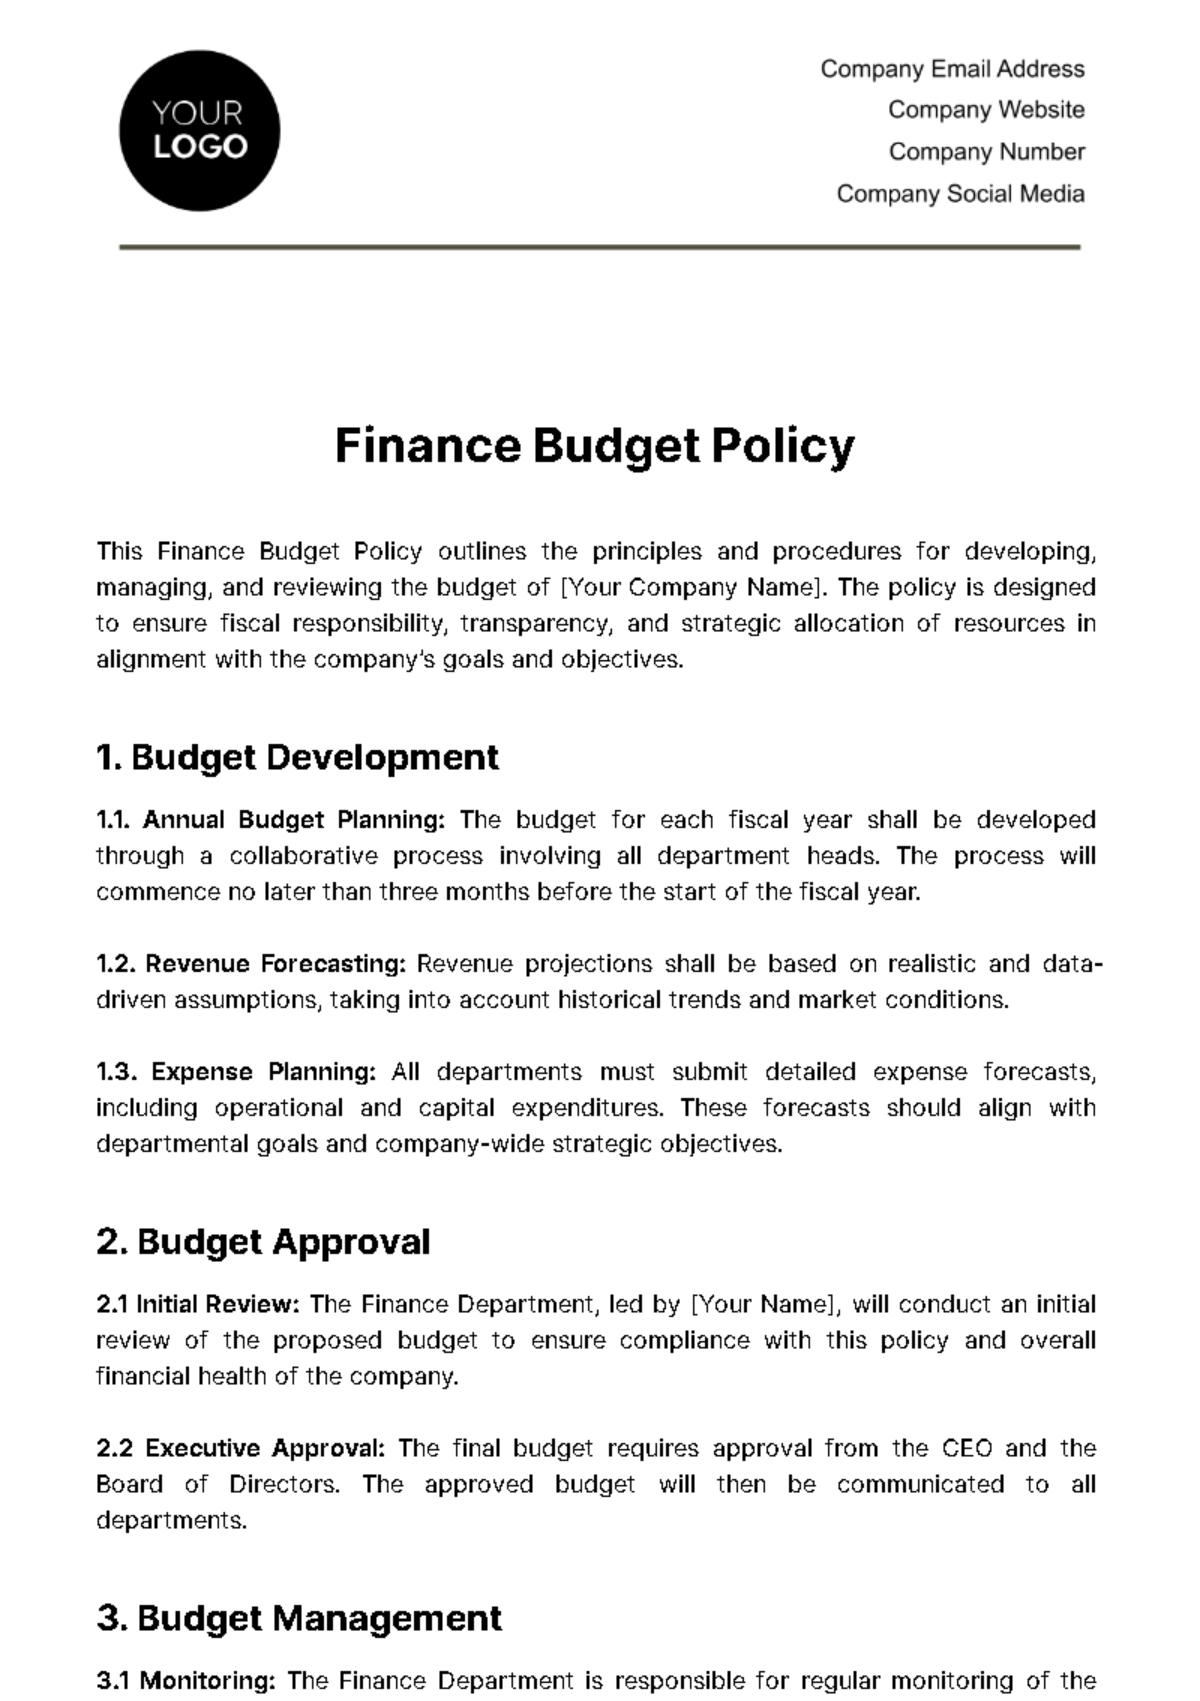 Free Finance Budget Policy Template